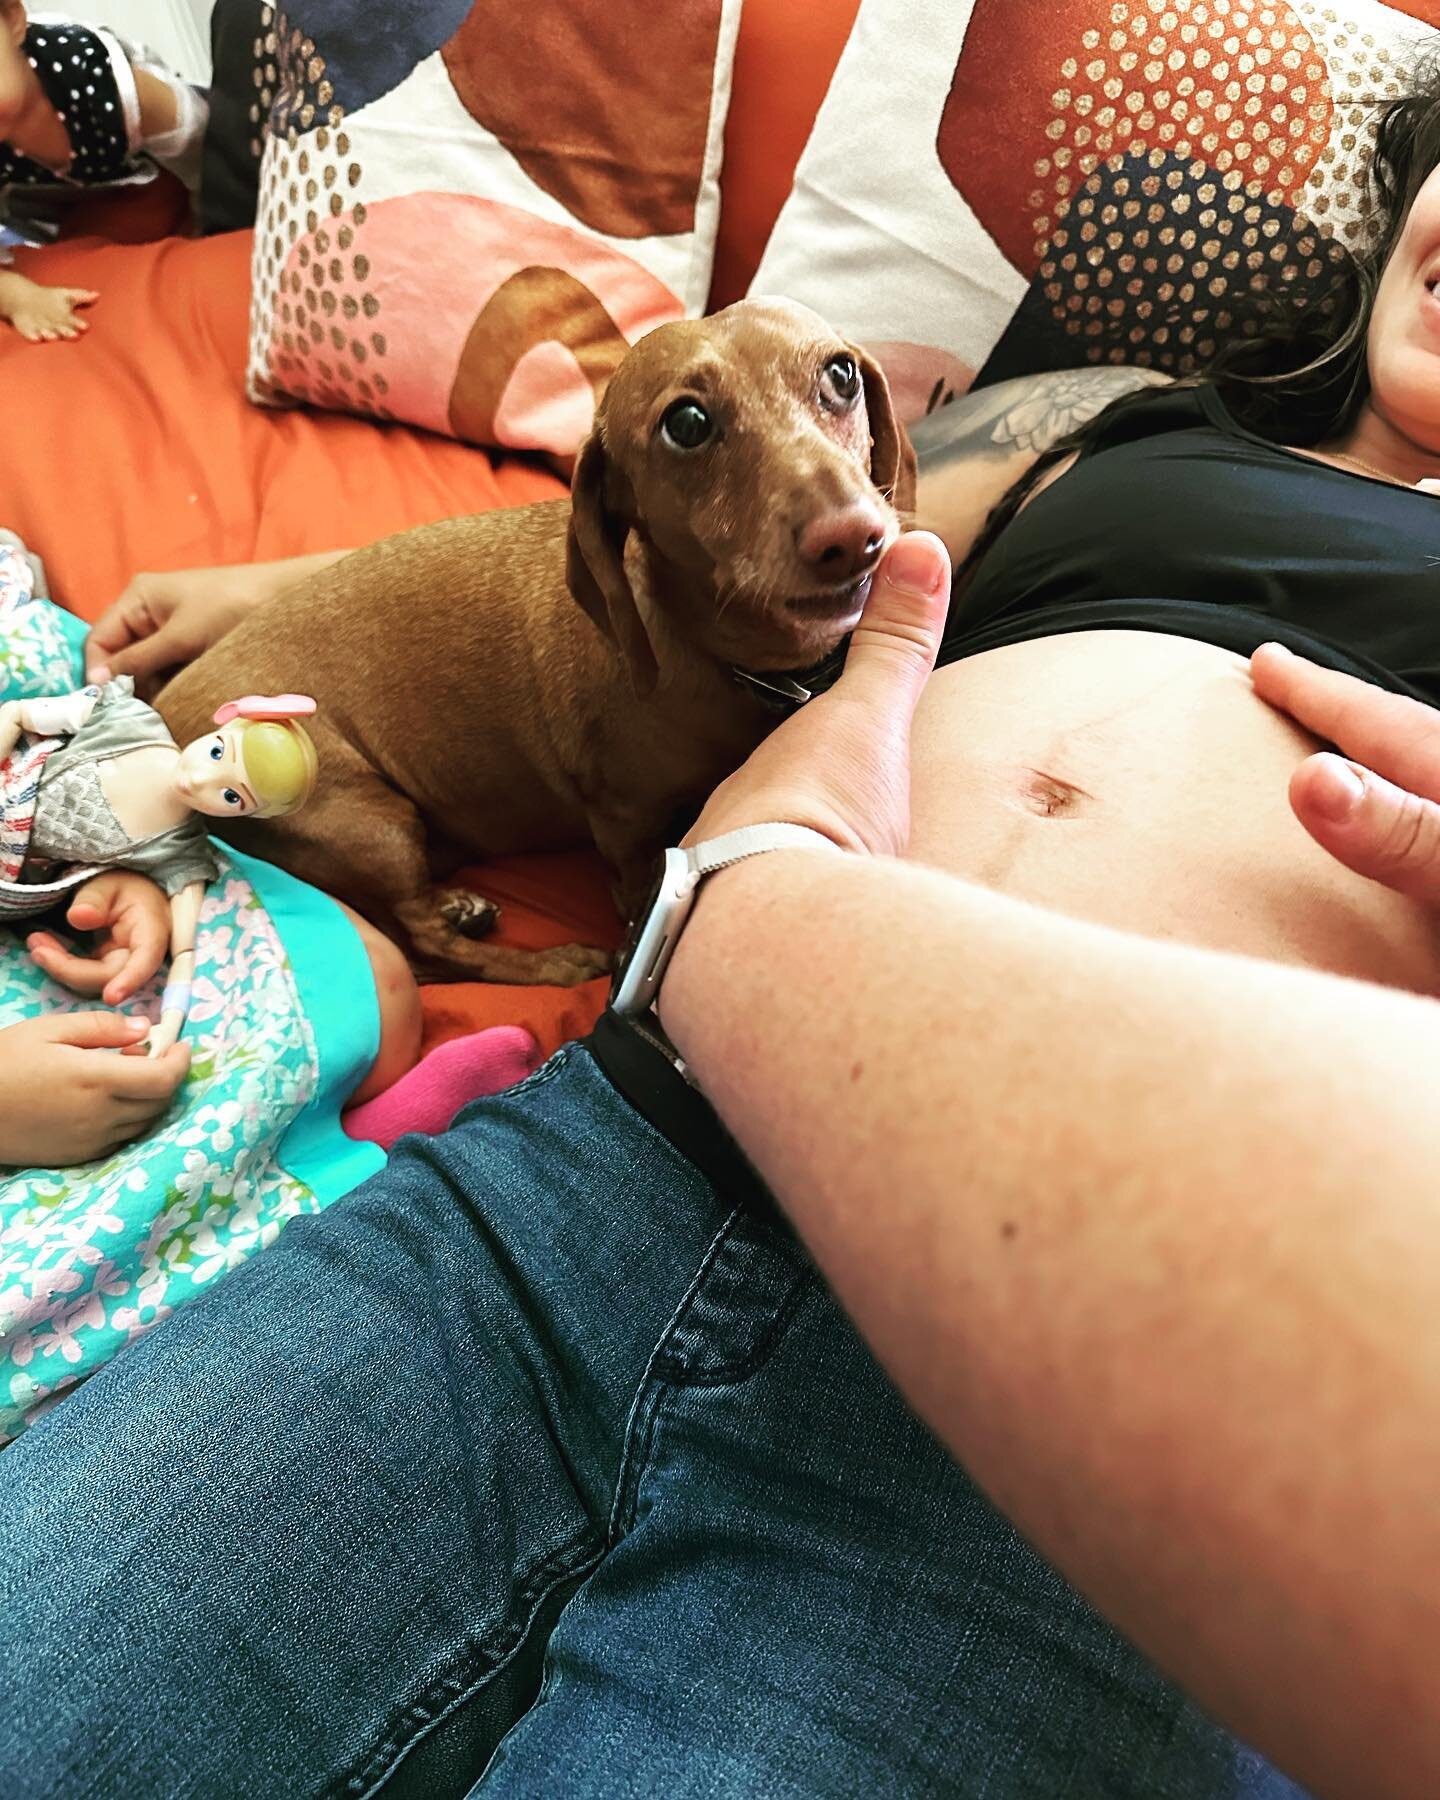 One of the sweetest things about being a home visiting midwife is that we get to check on mom and baby in the comfort of home surrounded by the whole family including siblings and pets. This sweet pup is joining big sis in assisting apprentice midwif